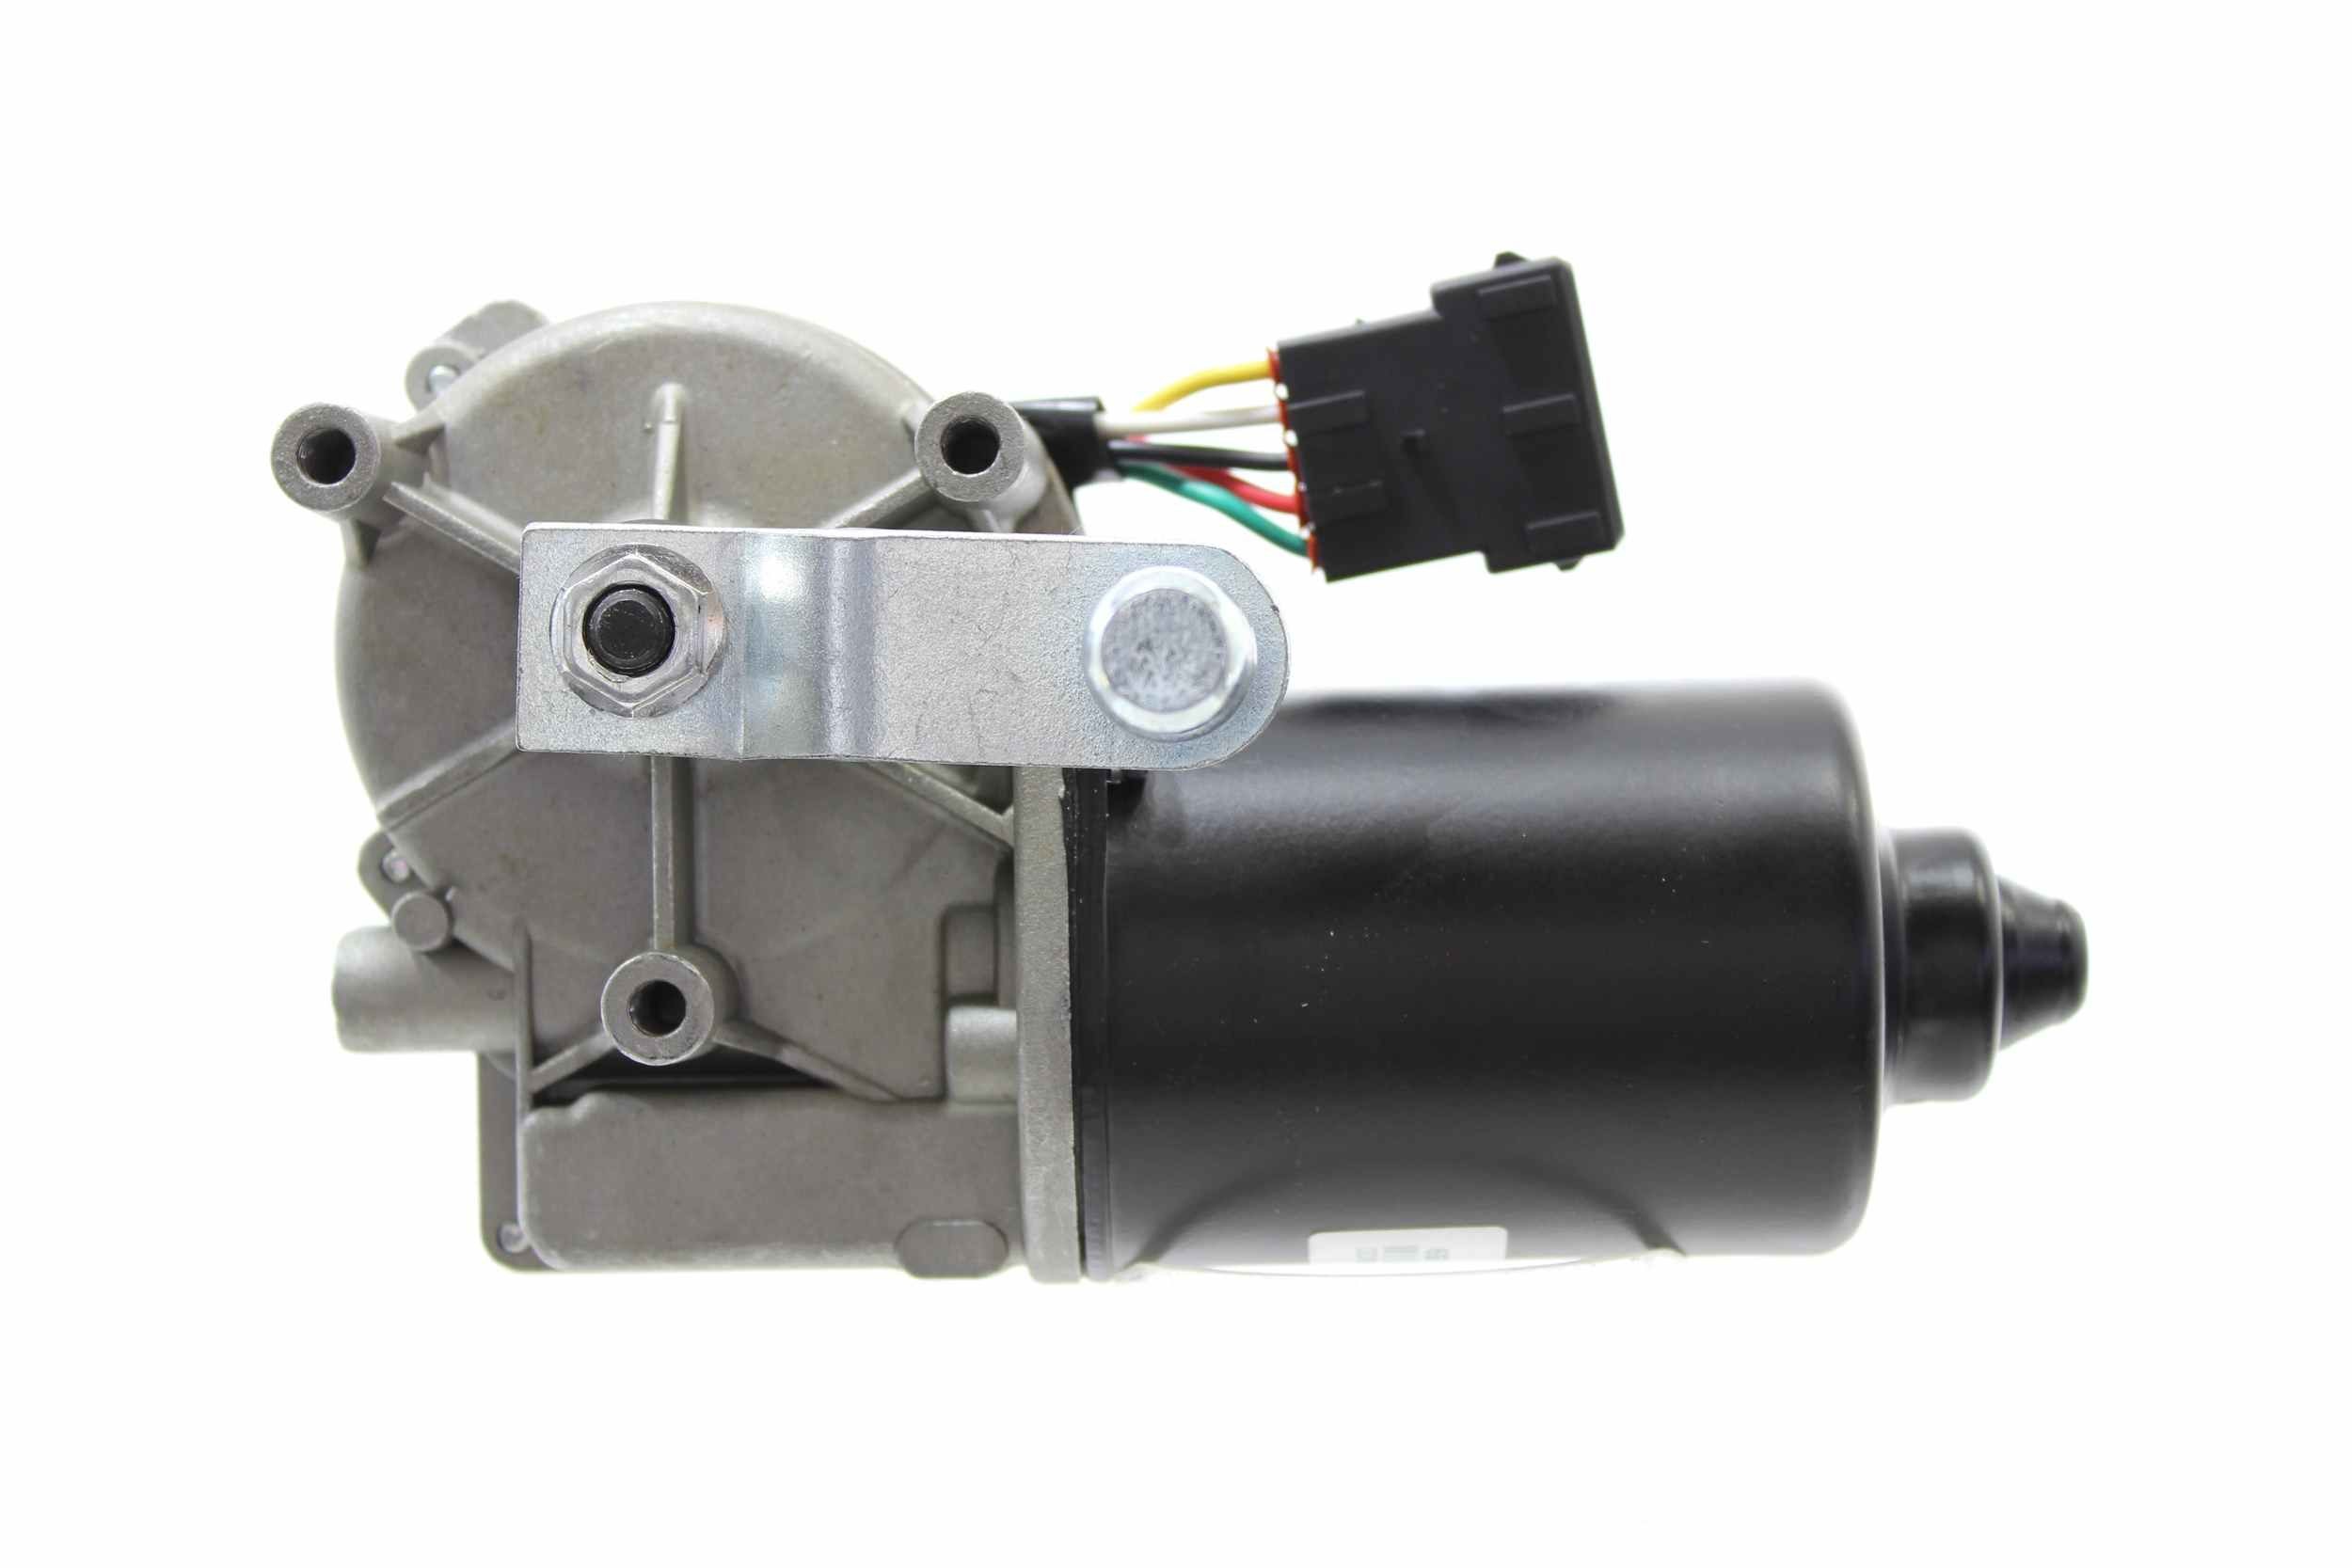 10800924 Motor for windscreen wipers 800924 ALANKO 24V, Front, for left-hand/right-hand drive vehicles